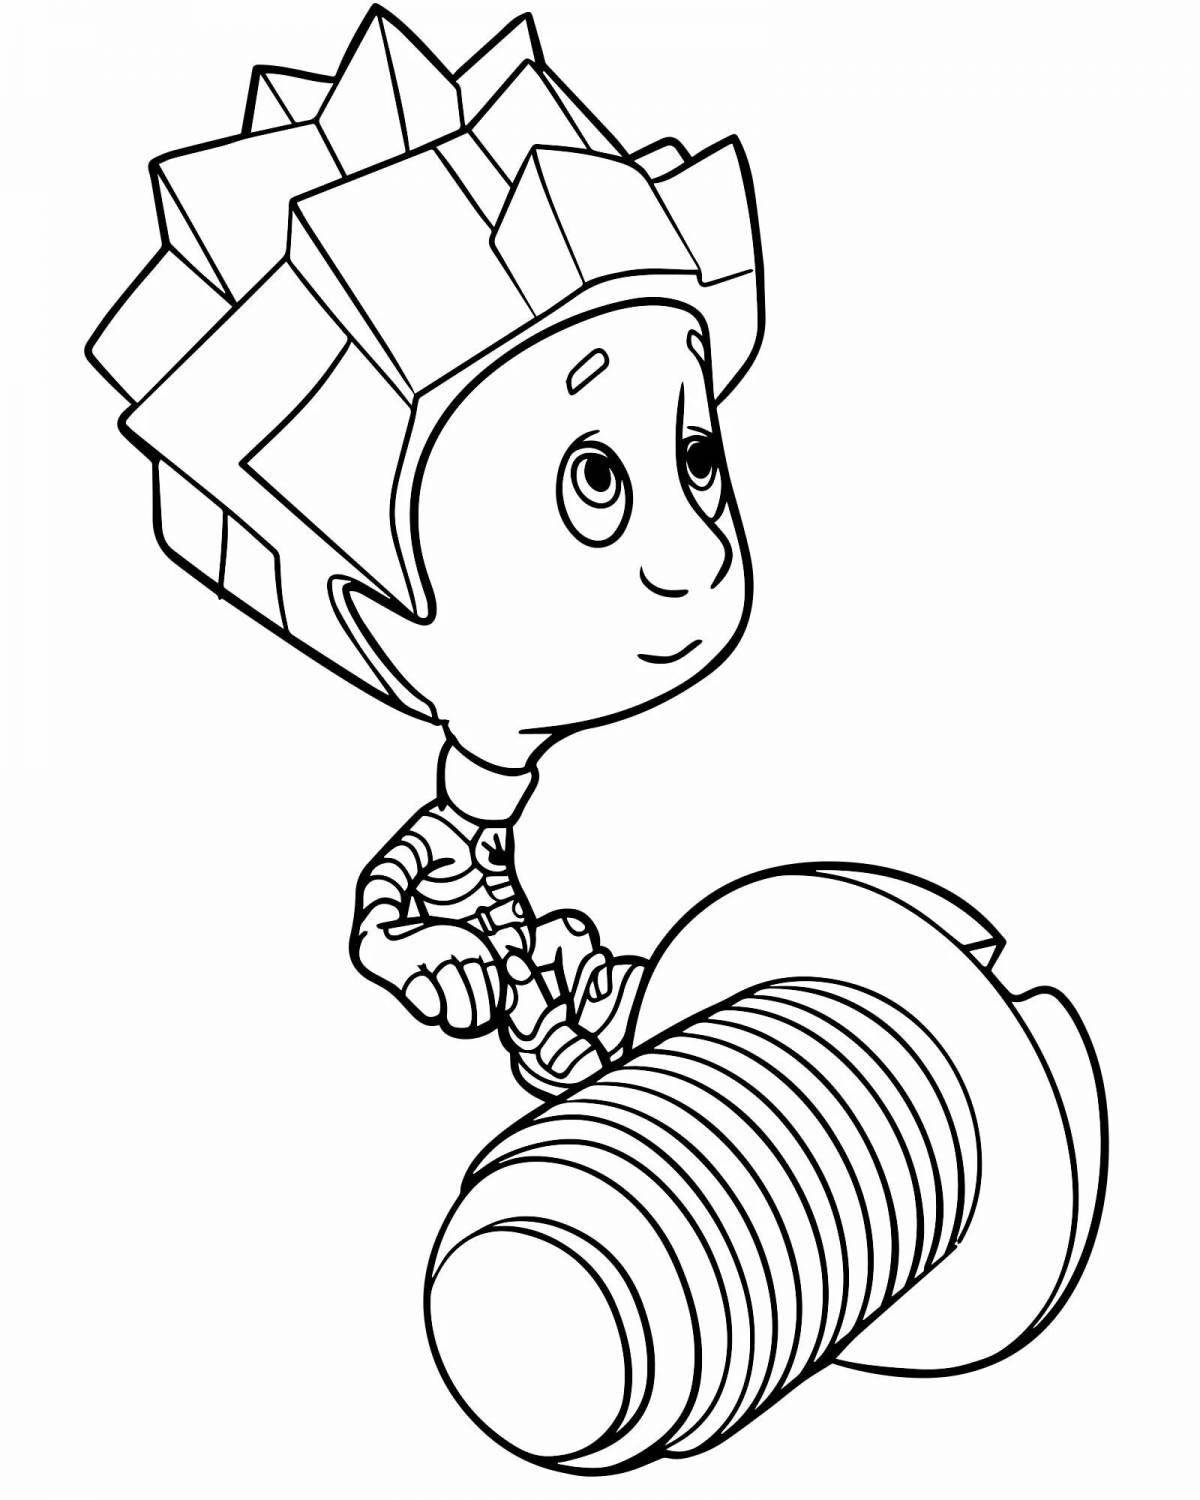 Adorable fixies coloring pages for kids